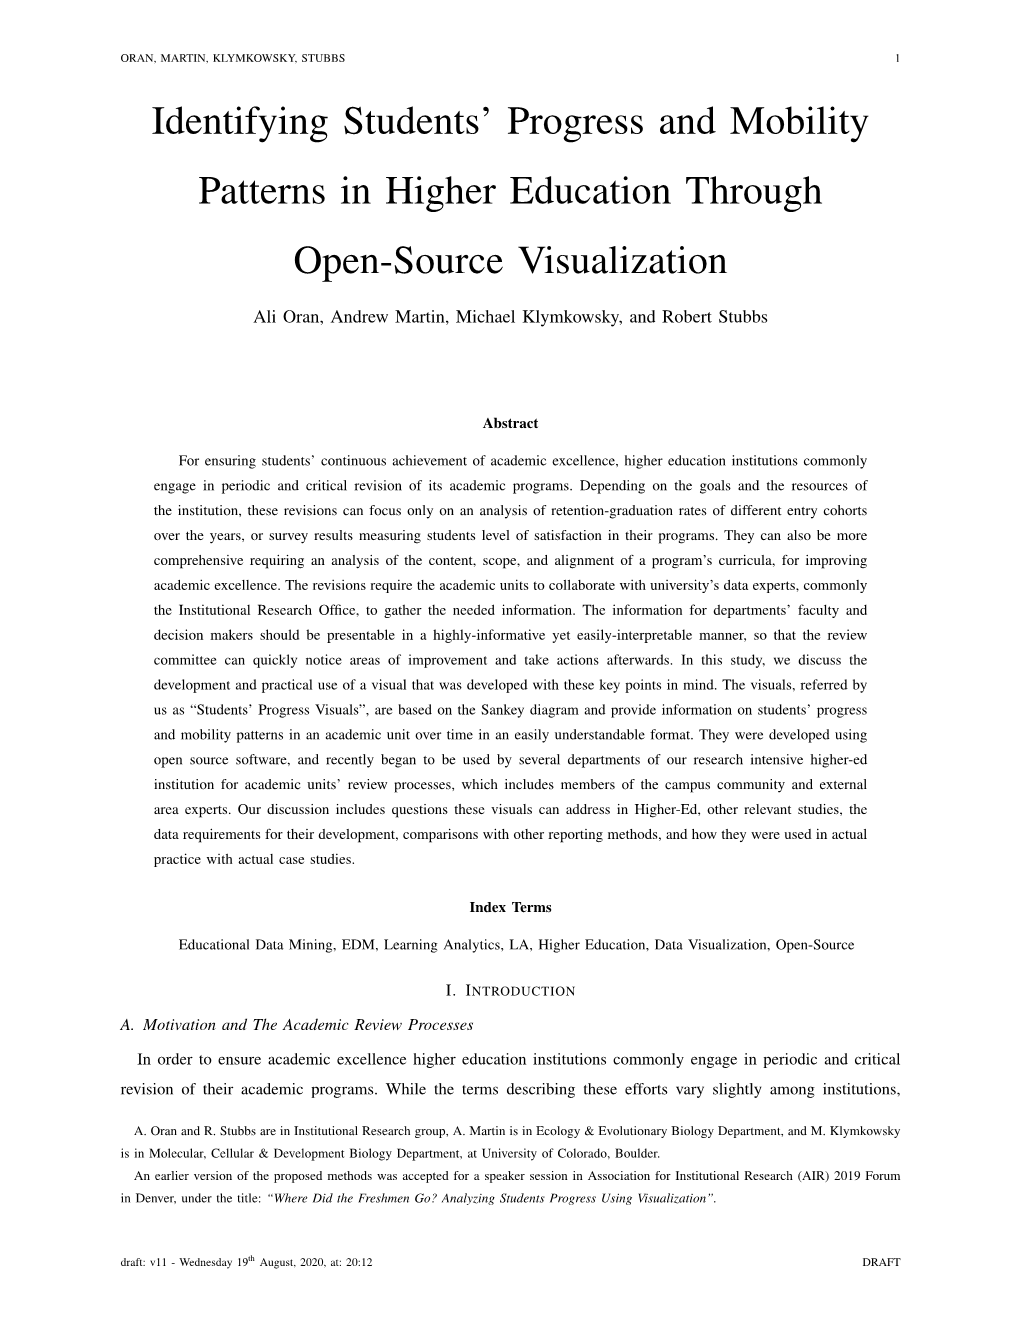 Identifying Students' Progress and Mobility Patterns in Higher